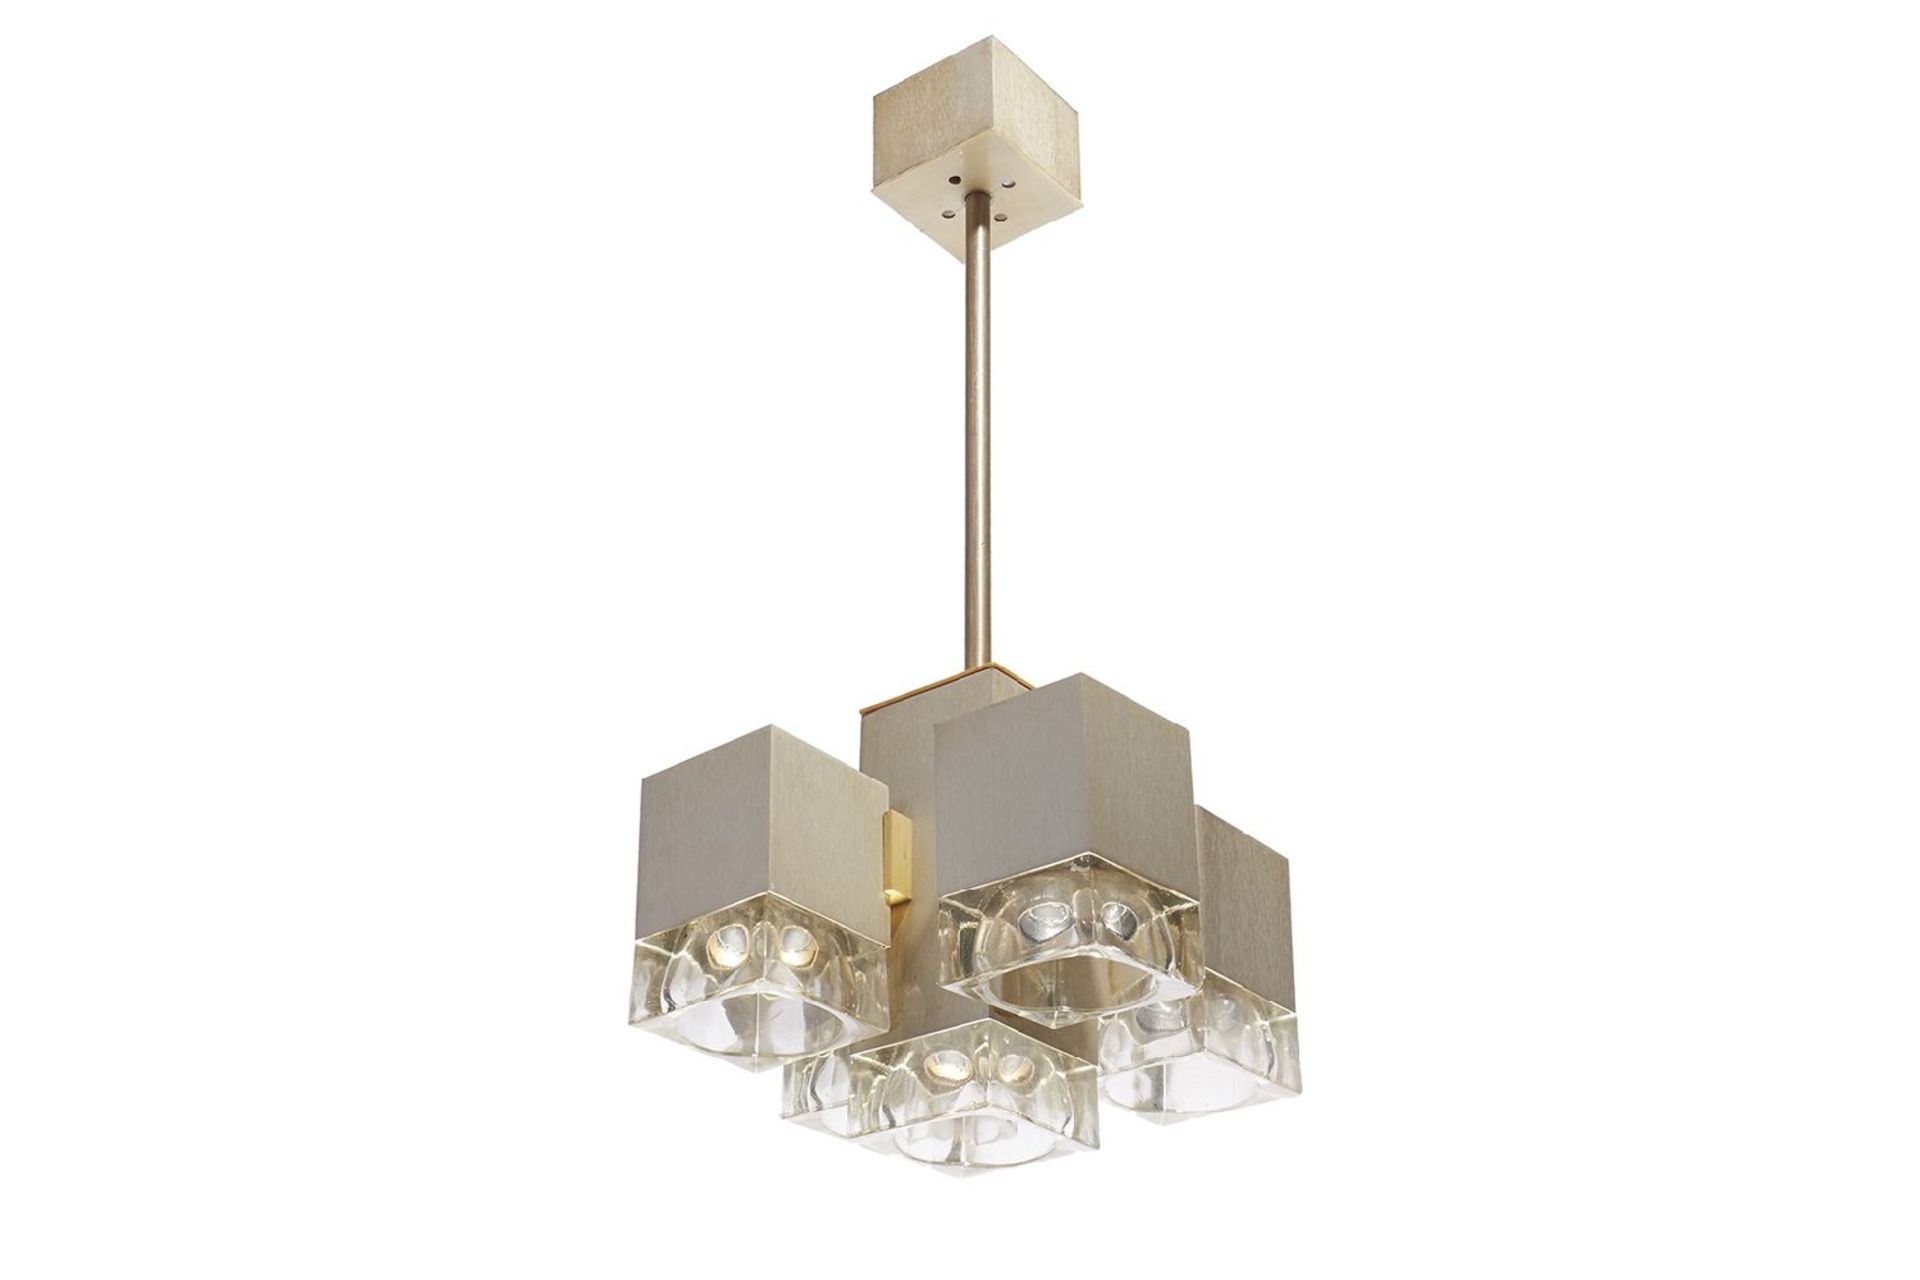 An Italian brushed steel and glass five-light cubic chandelier,by Gaetano Sciolari (1927-1994), c.